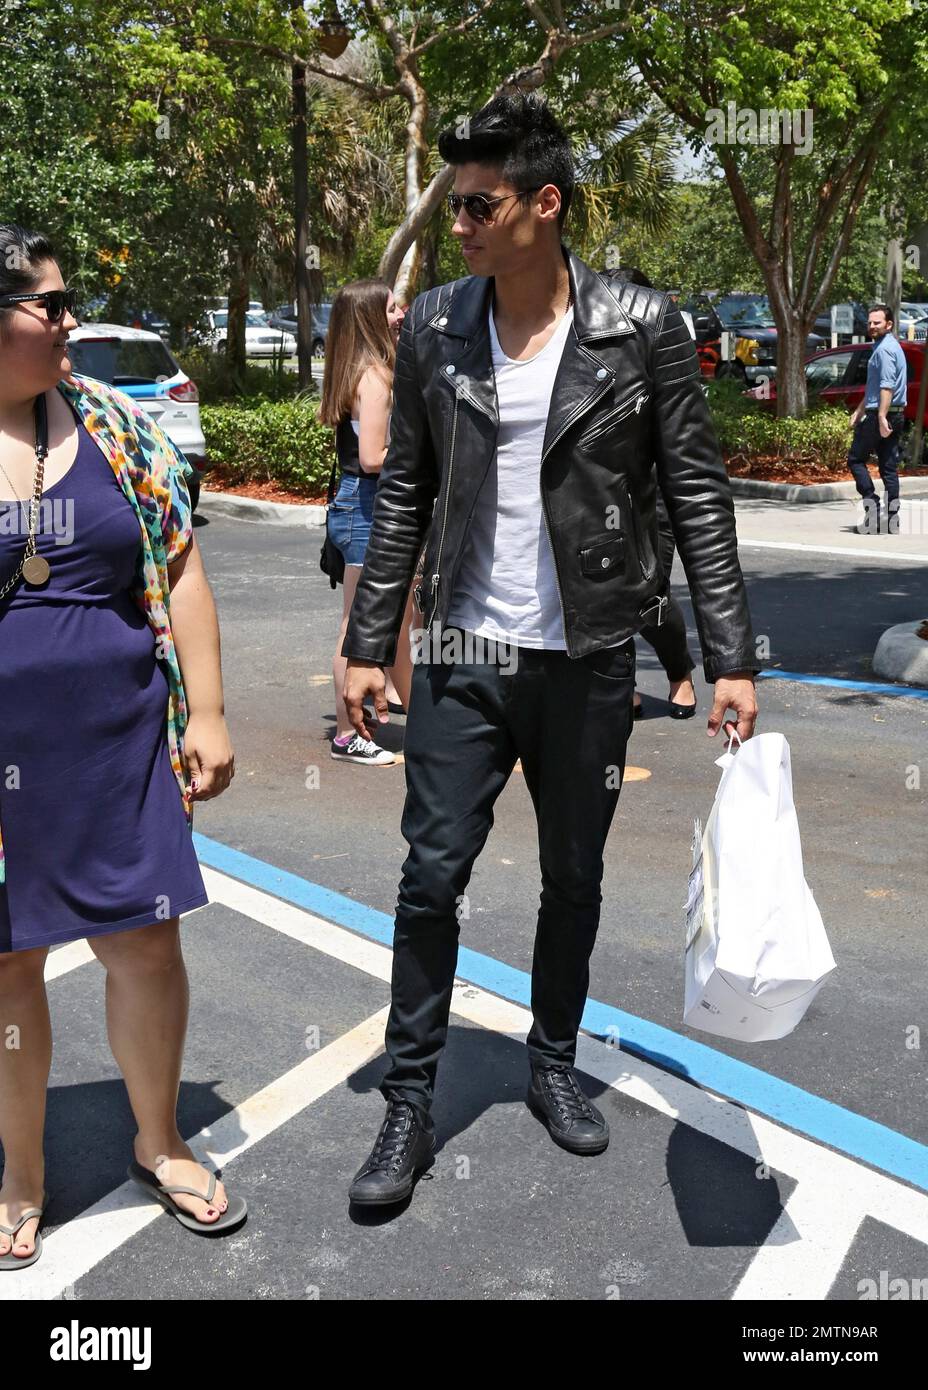 The Wanted's Siva Kaneswaran leaves Miami's Y100 radio station after making  an appearance where he reportedly discussed reports that the band is  splitting up and he plans to go solo. He took